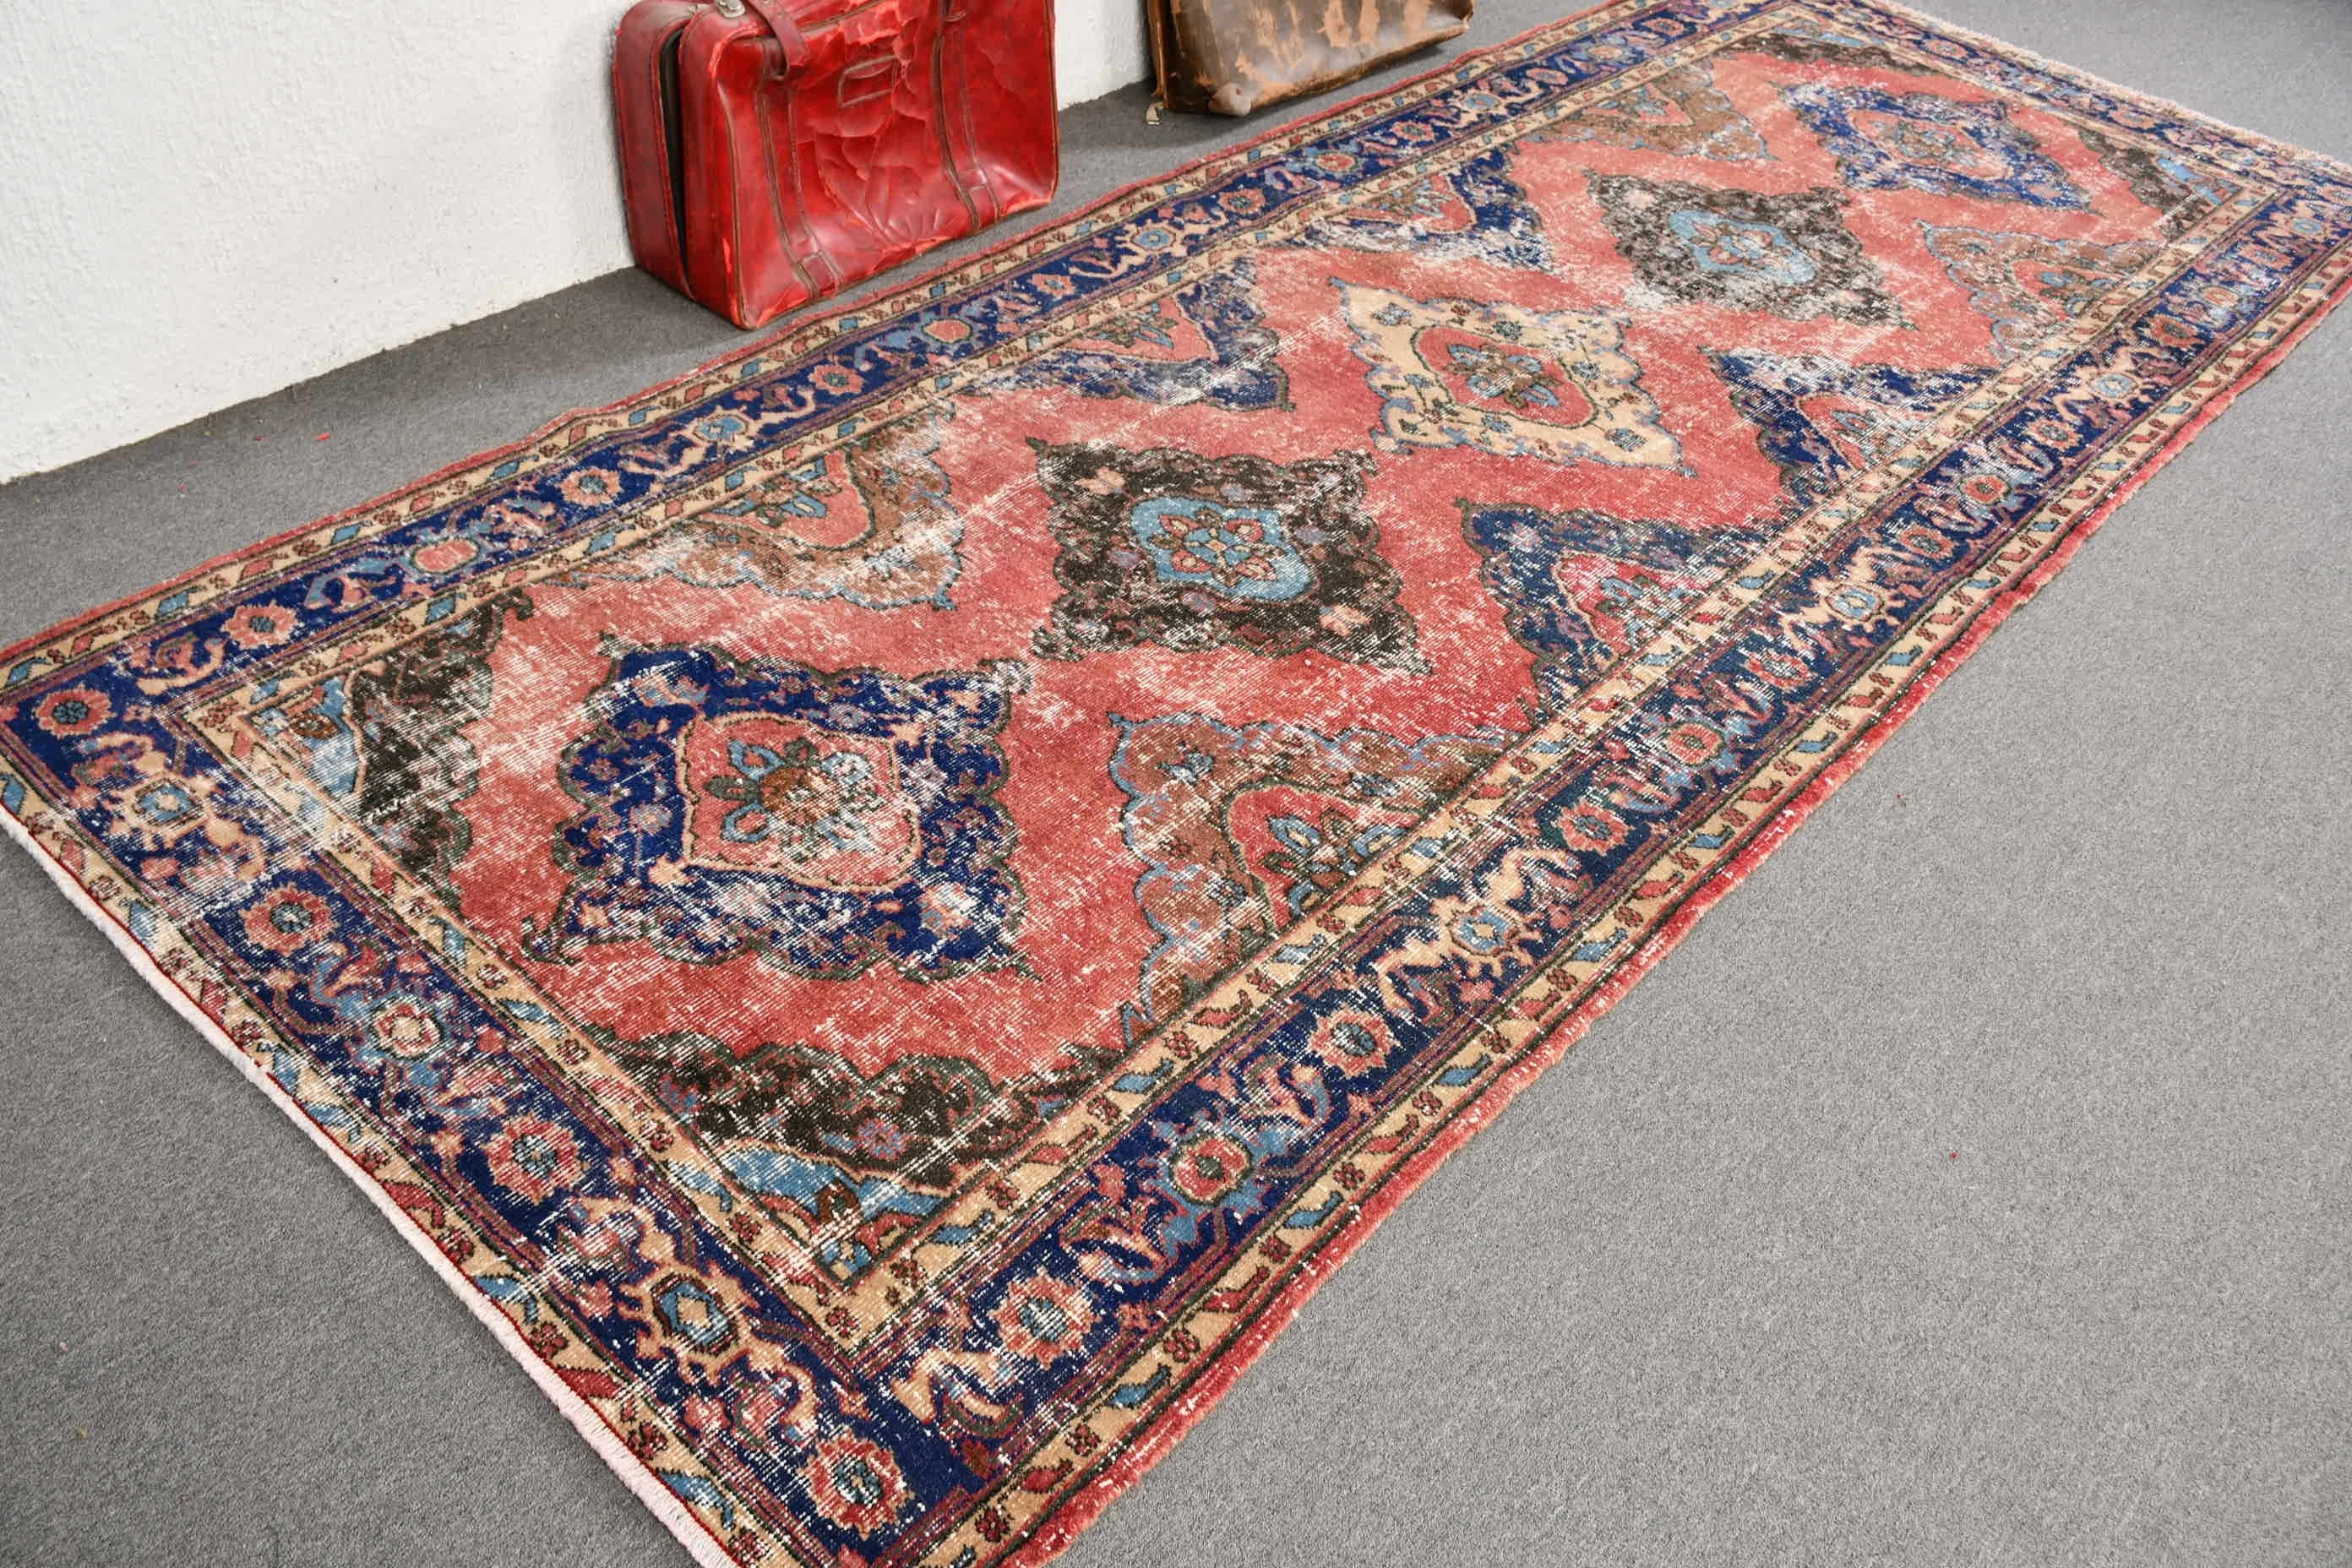 Home Decor Rug, Red Antique Rugs, Vintage Rug, Rugs for Runner, 4.8x12.1 ft Runner Rugs, Kitchen Rugs, Stair Rug, Turkish Rugs, Oushak Rug